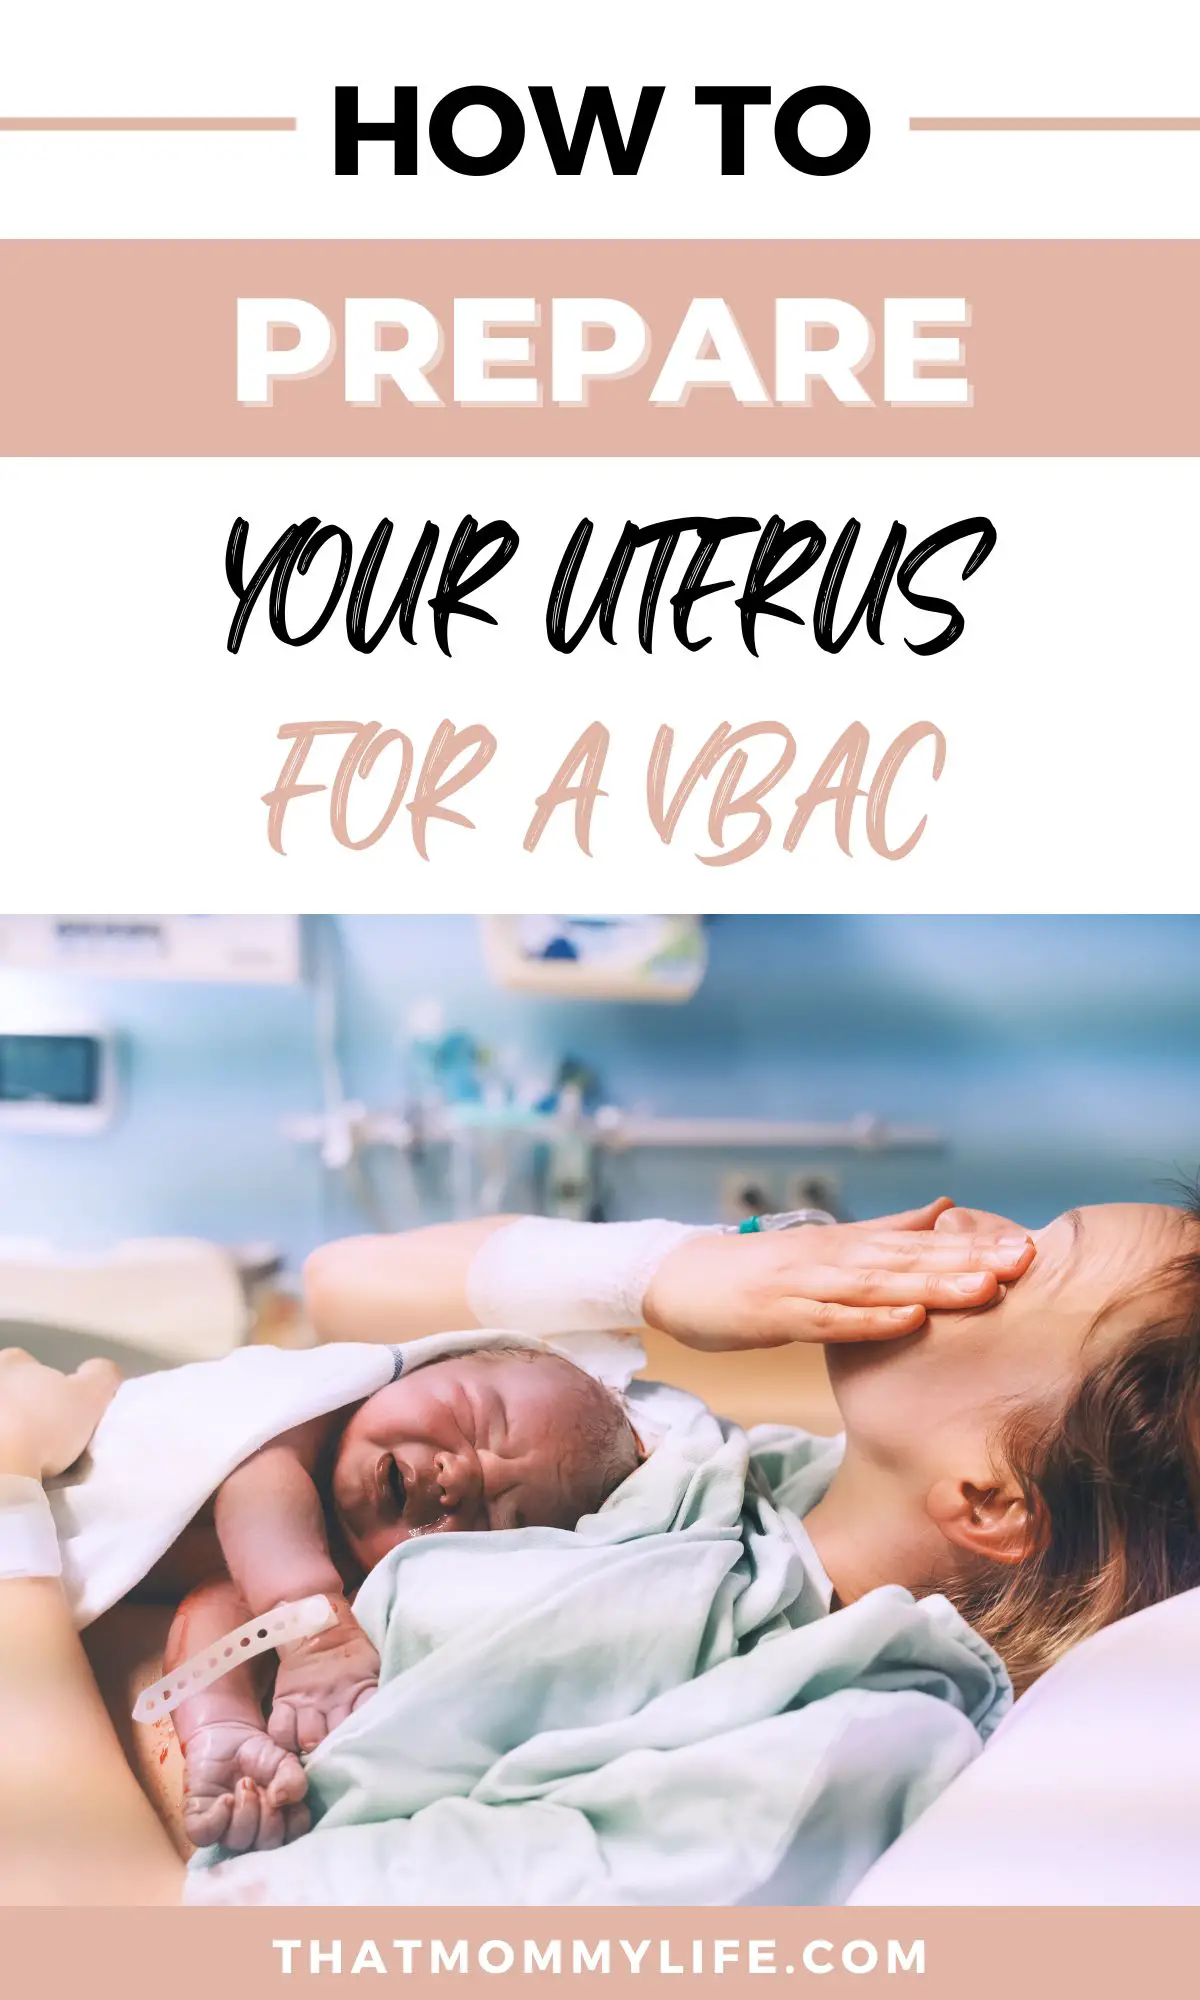 how to strengthen uterus for vbac